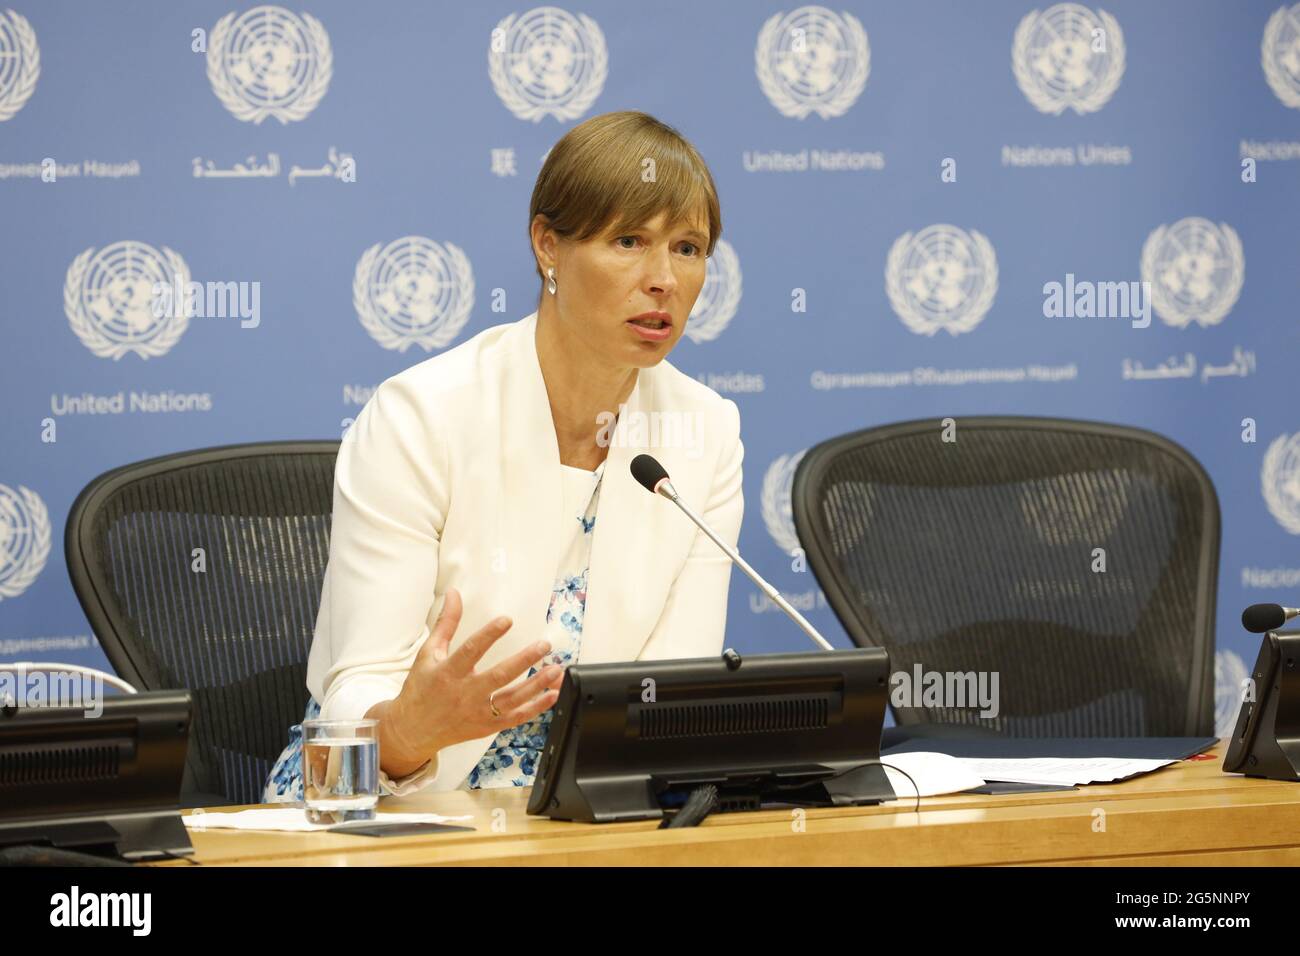 United Nations. 28th June, 2021. Estonian President Kersti Kaljulaid speaks to the press after her appointment at the UN headquarters in New York, on June 28, 2021. United Nations Secretary-General Antonio Guterres on Monday designated Estonian President Kersti Kaljulaid as his global advocate for the health and well-being of women, children and adolescents for the next two years. Credit: Xie E/Xinhua/Alamy Live News Stock Photo